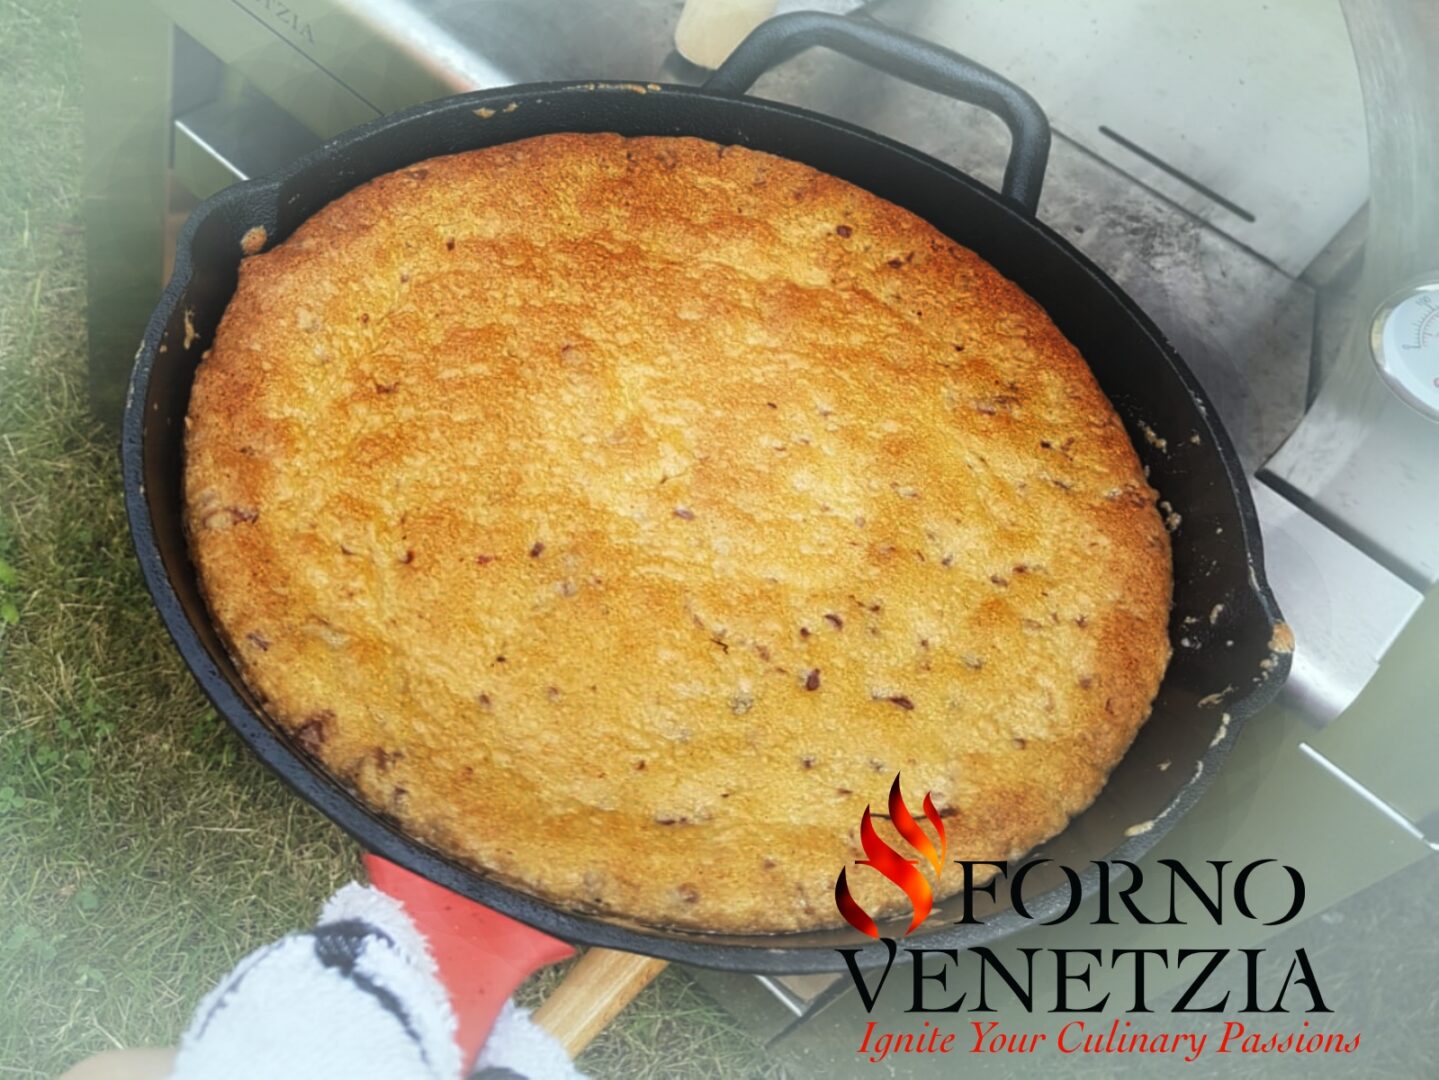 Corn Bread cooked in Wood Burning Oven